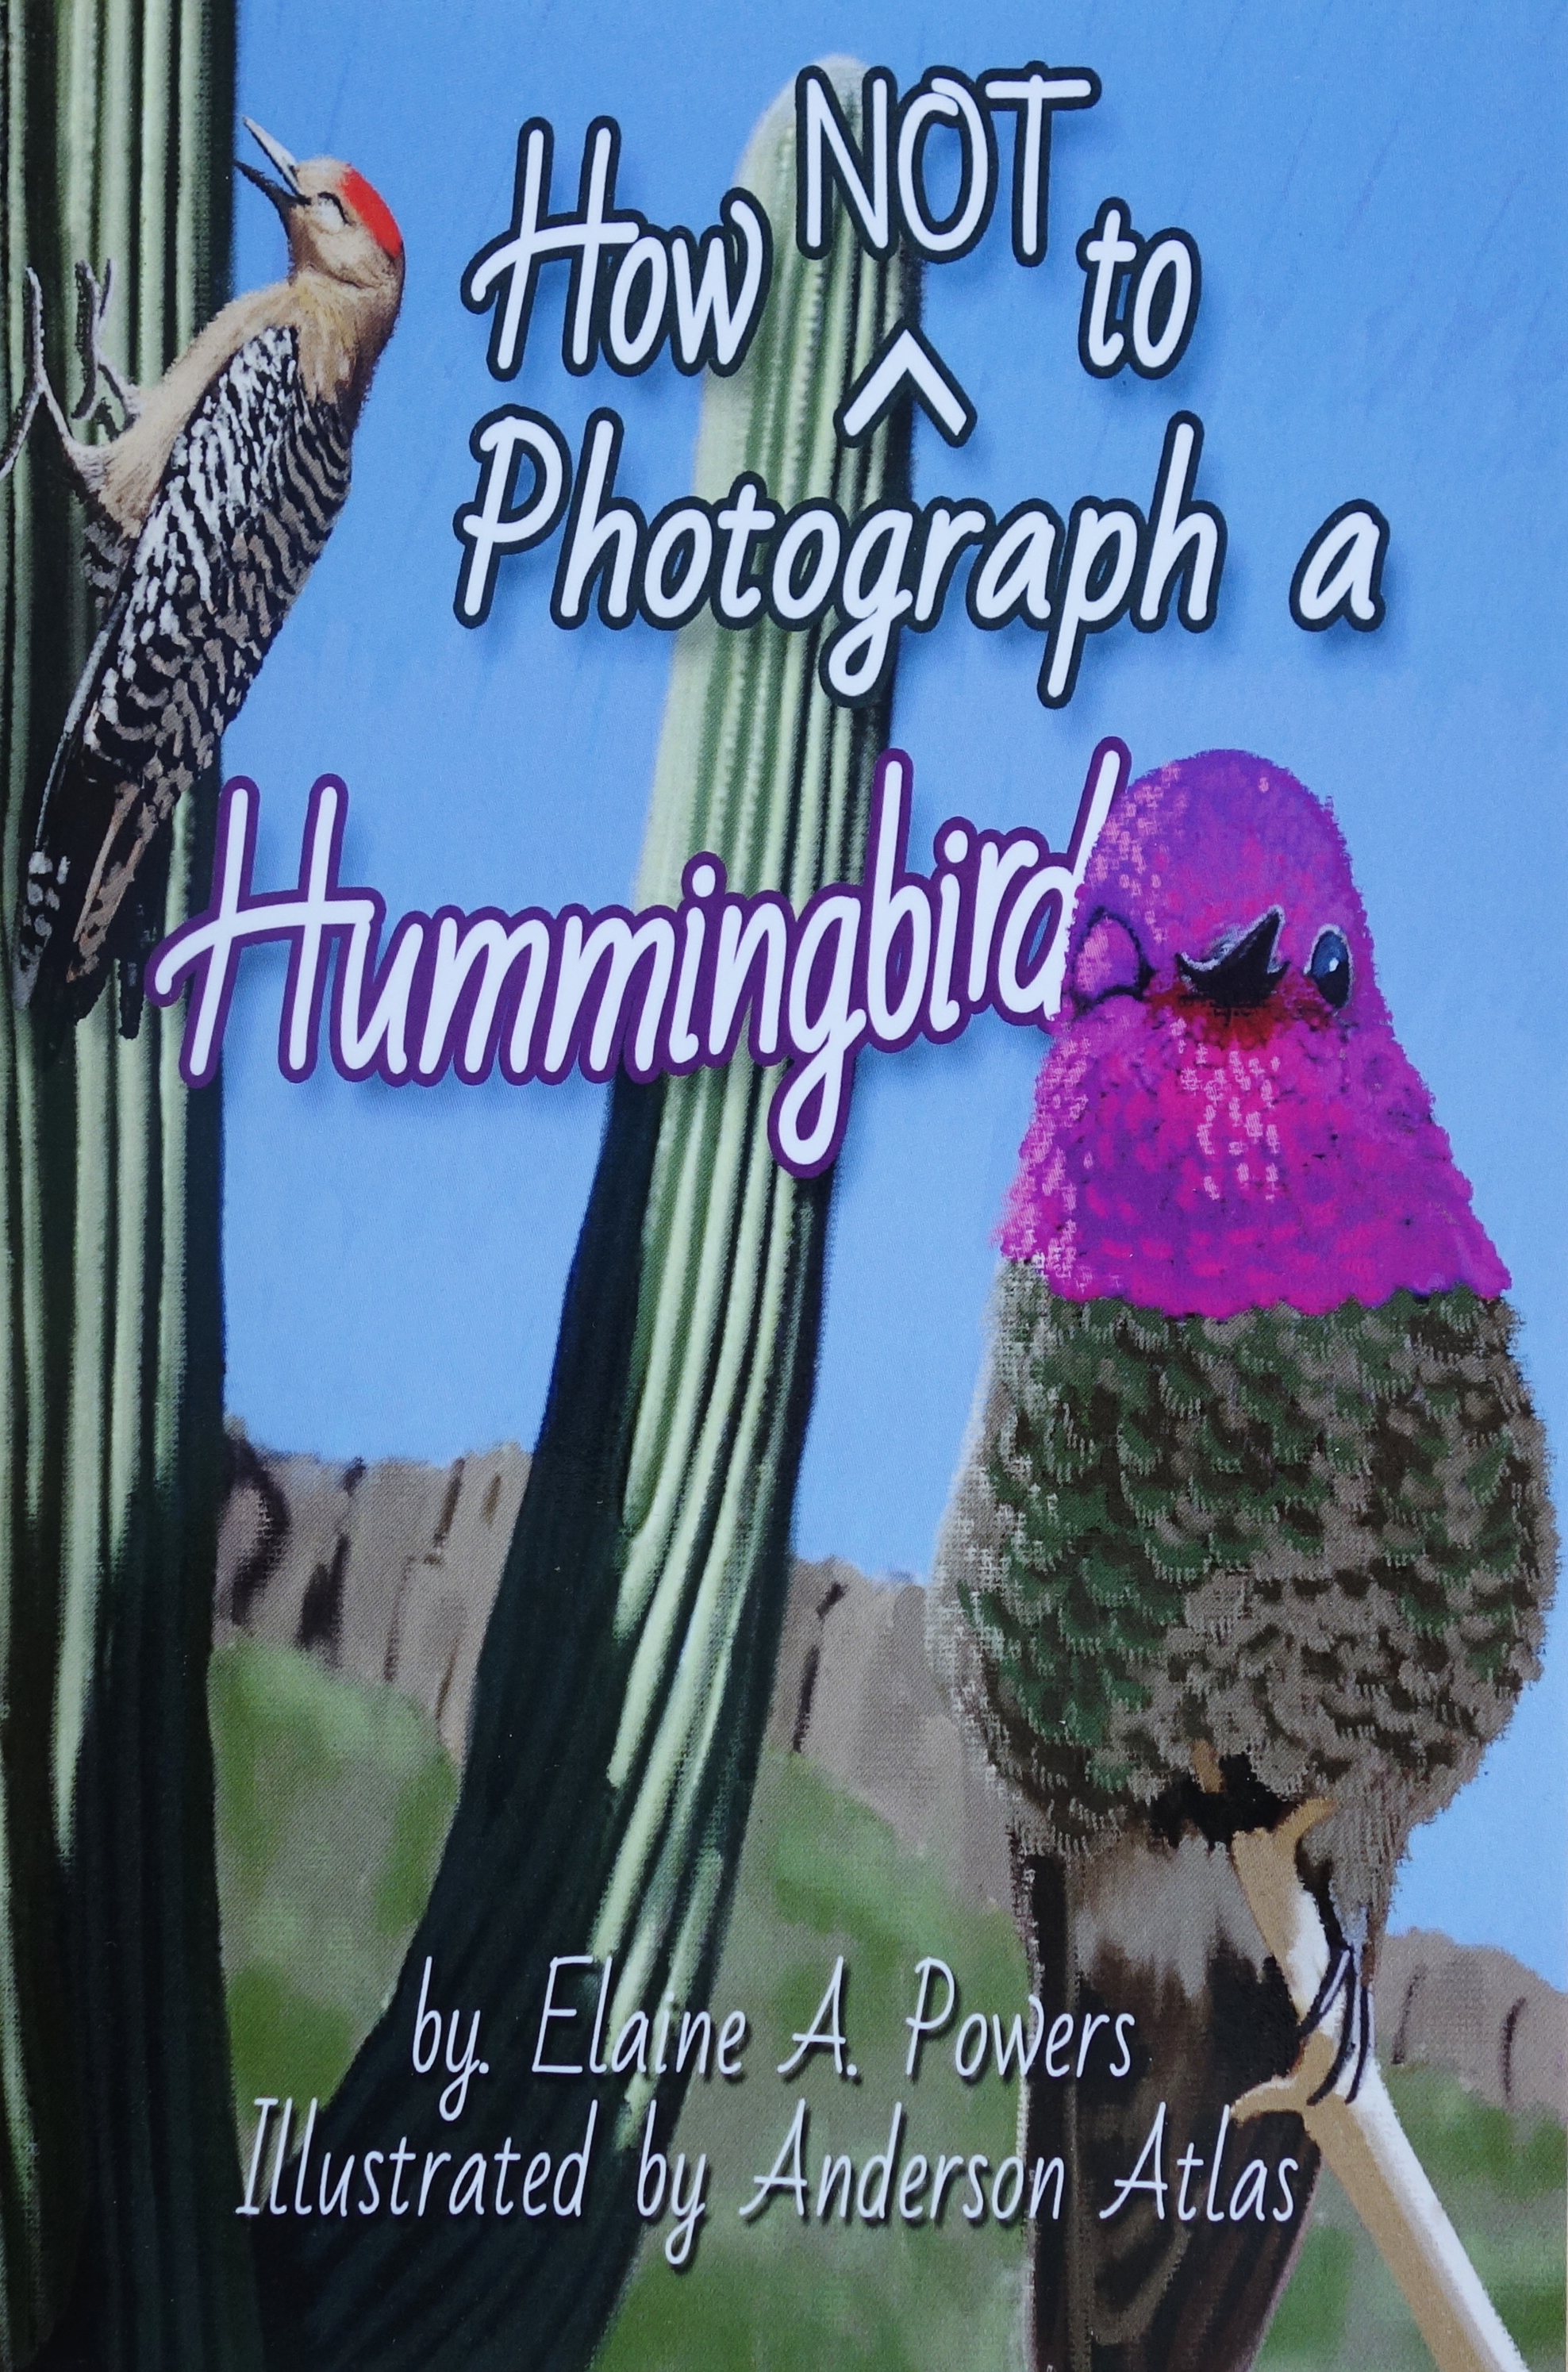 Colorful book cover illustrated with Anna's Hummingbird in The Sonoran Desert